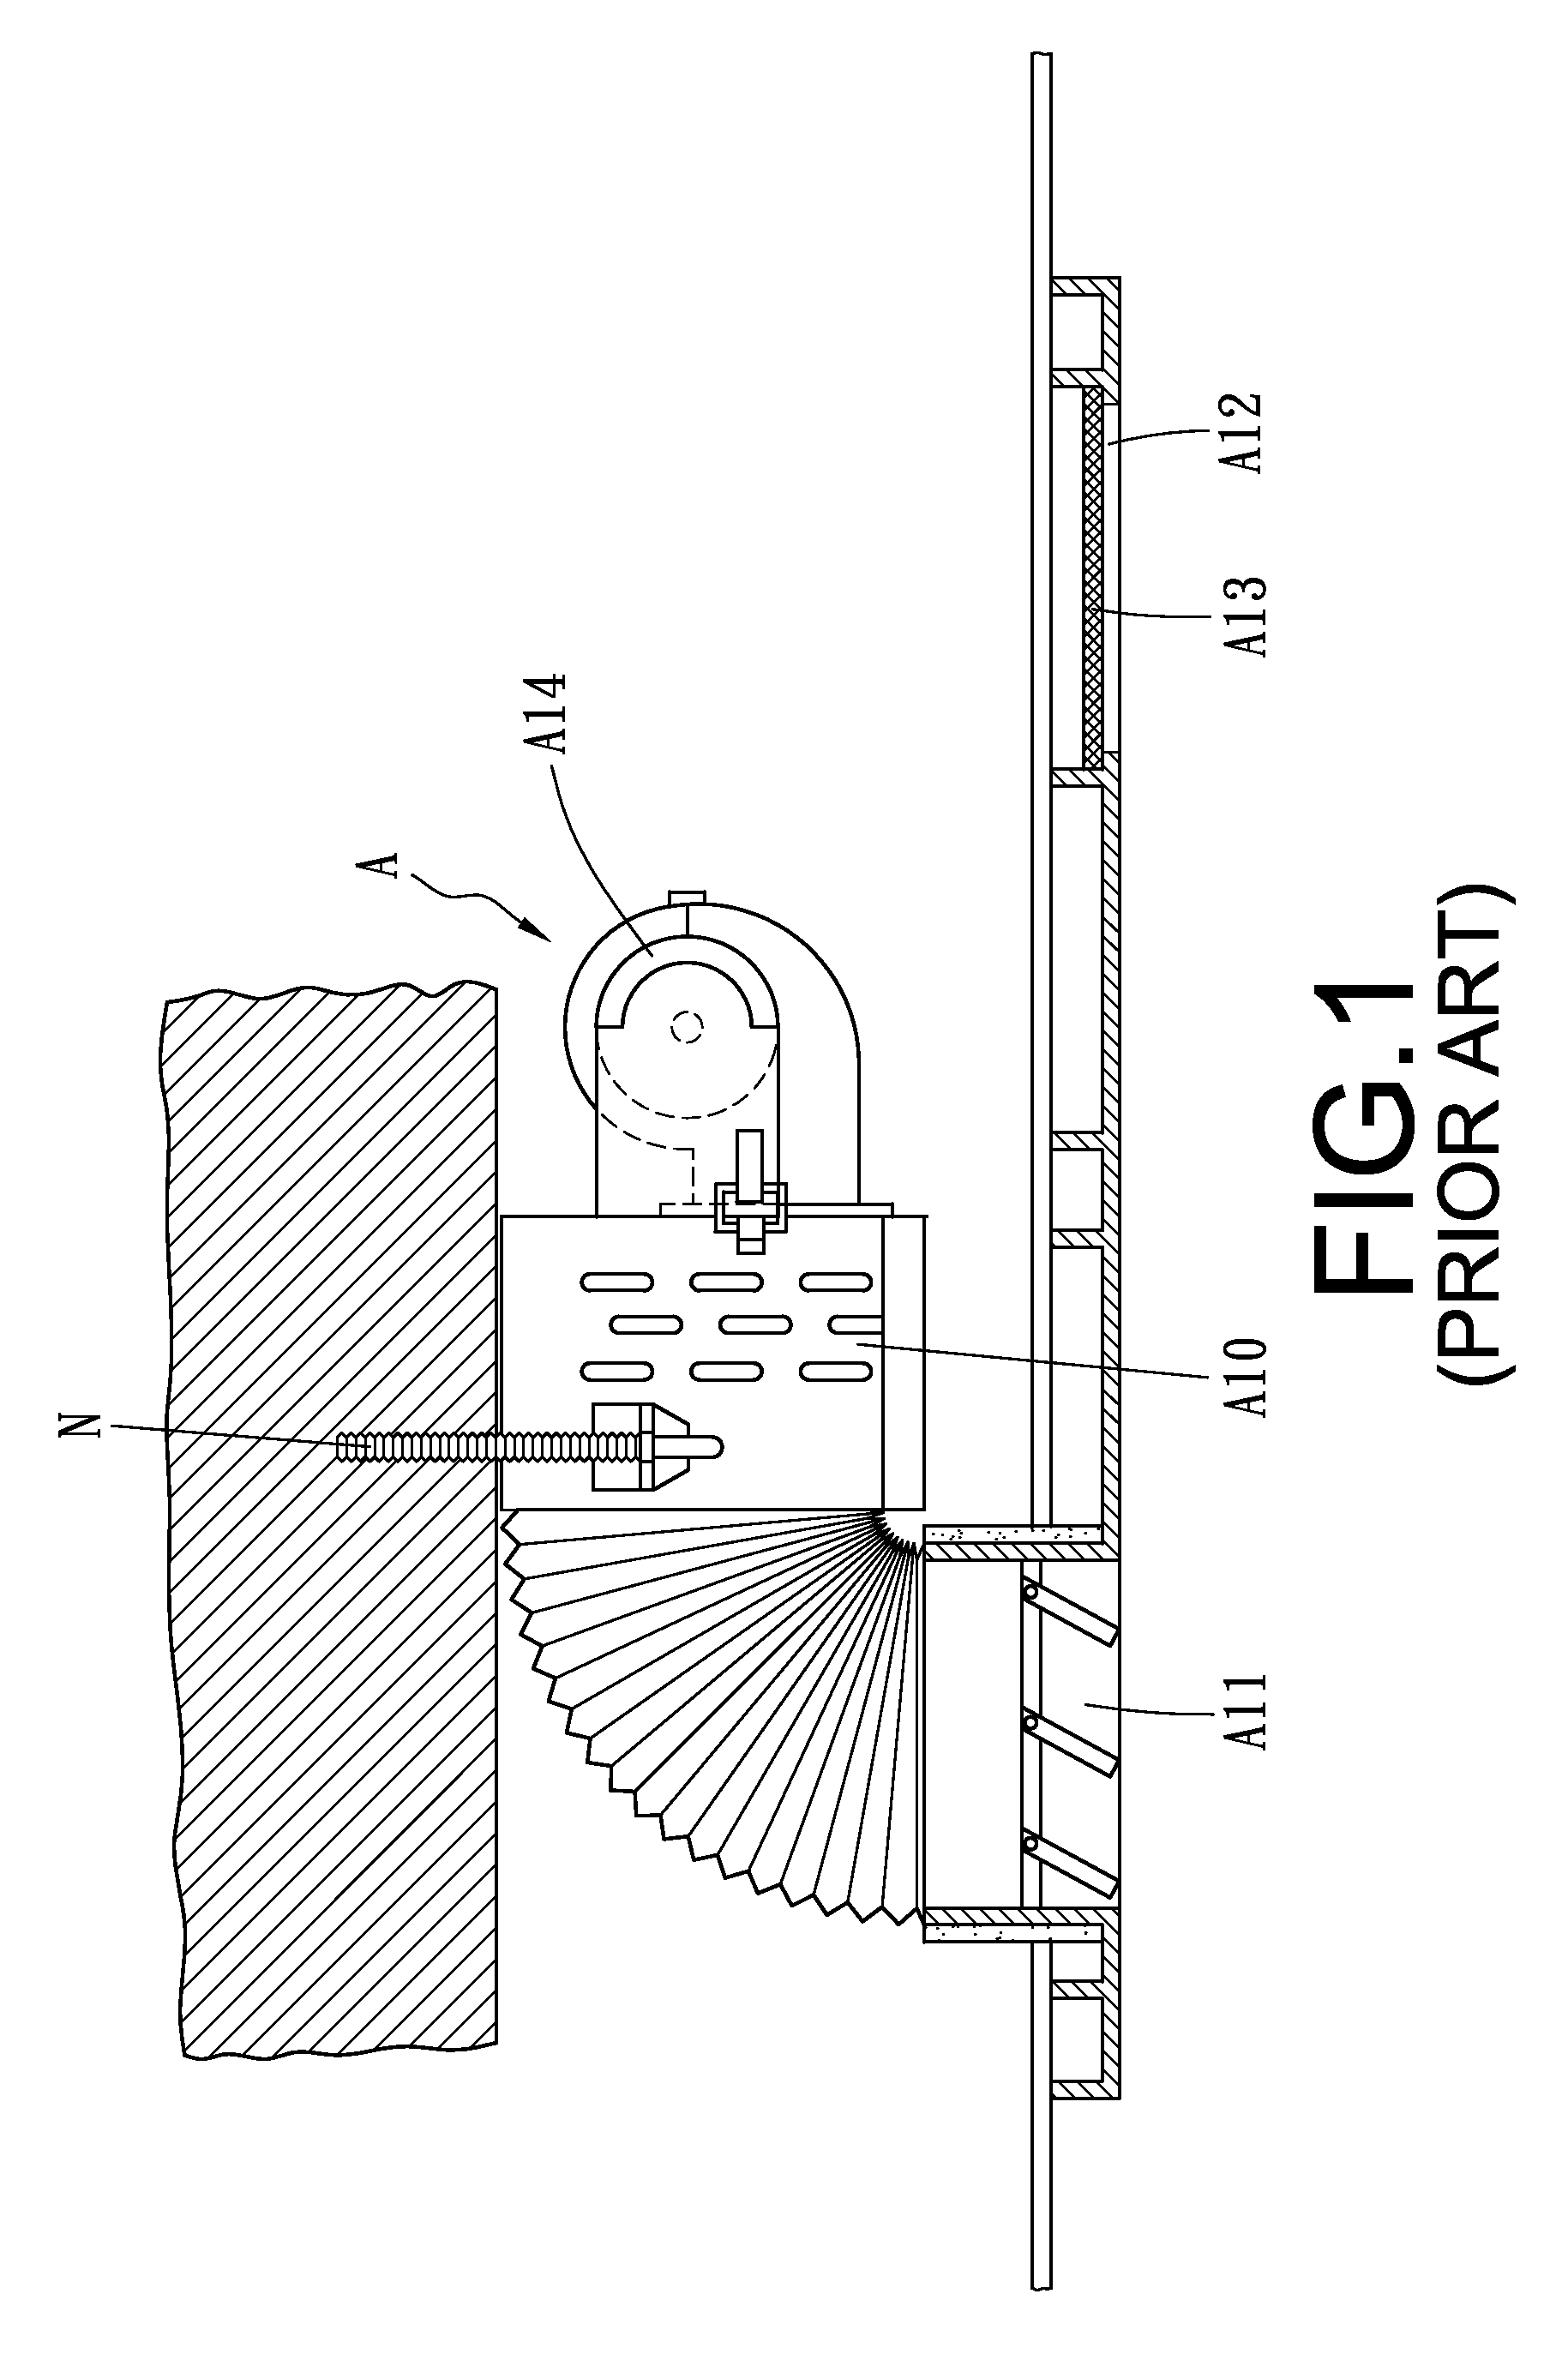 Auto-cleaning device for an indoor air conditioner